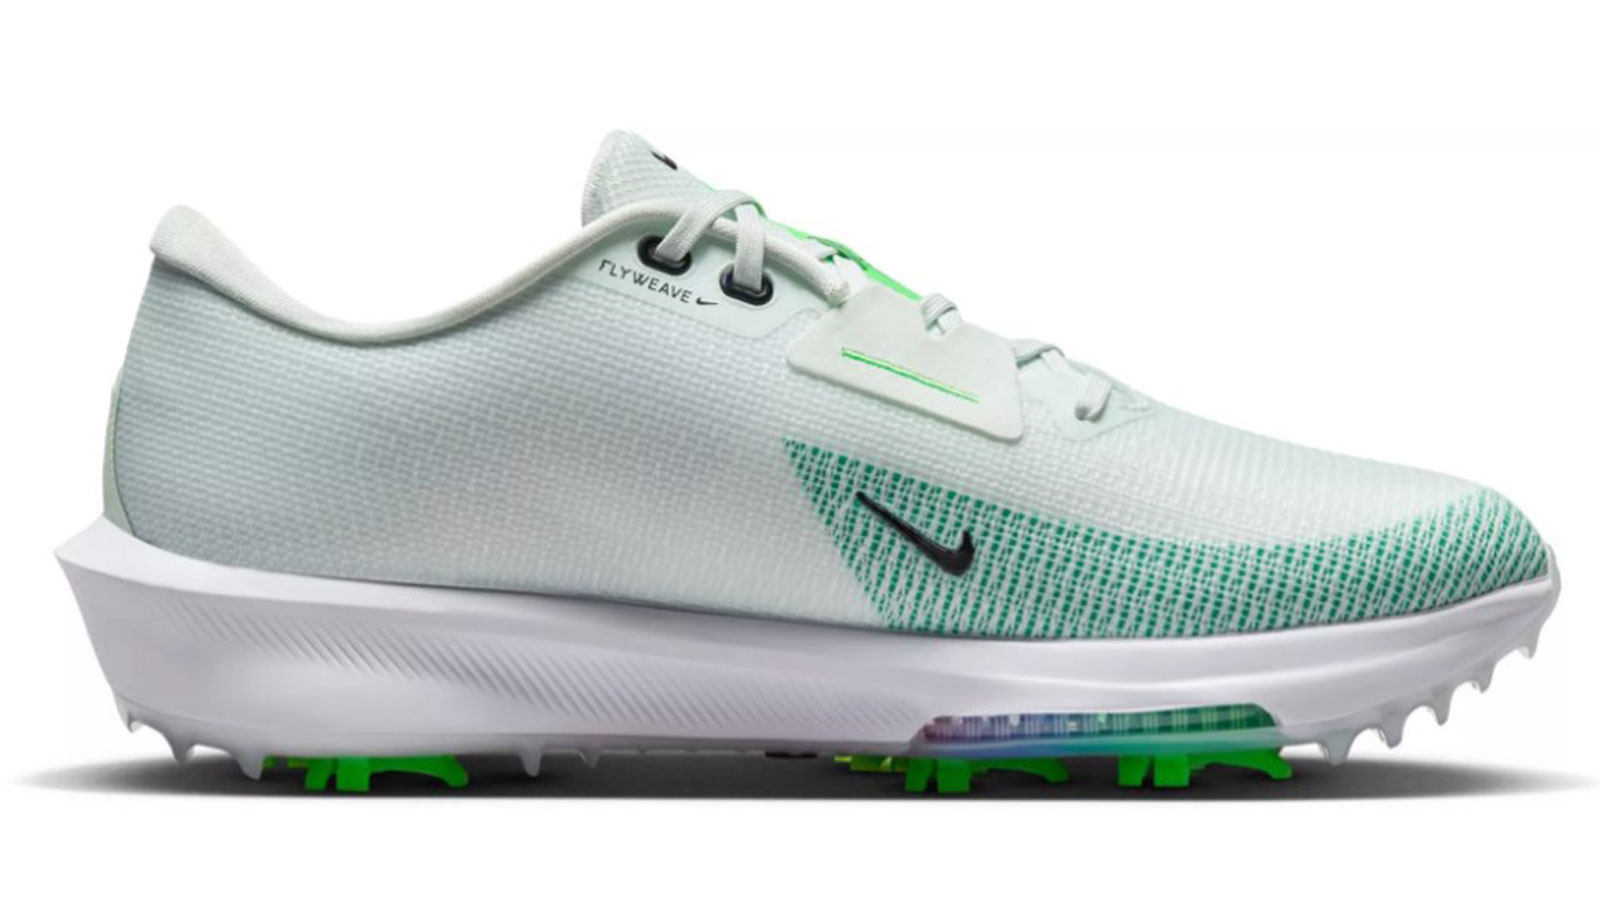 The side of the Nike Air Zoom Infinity Tour NEXT% 2 NRG Golf Shoes